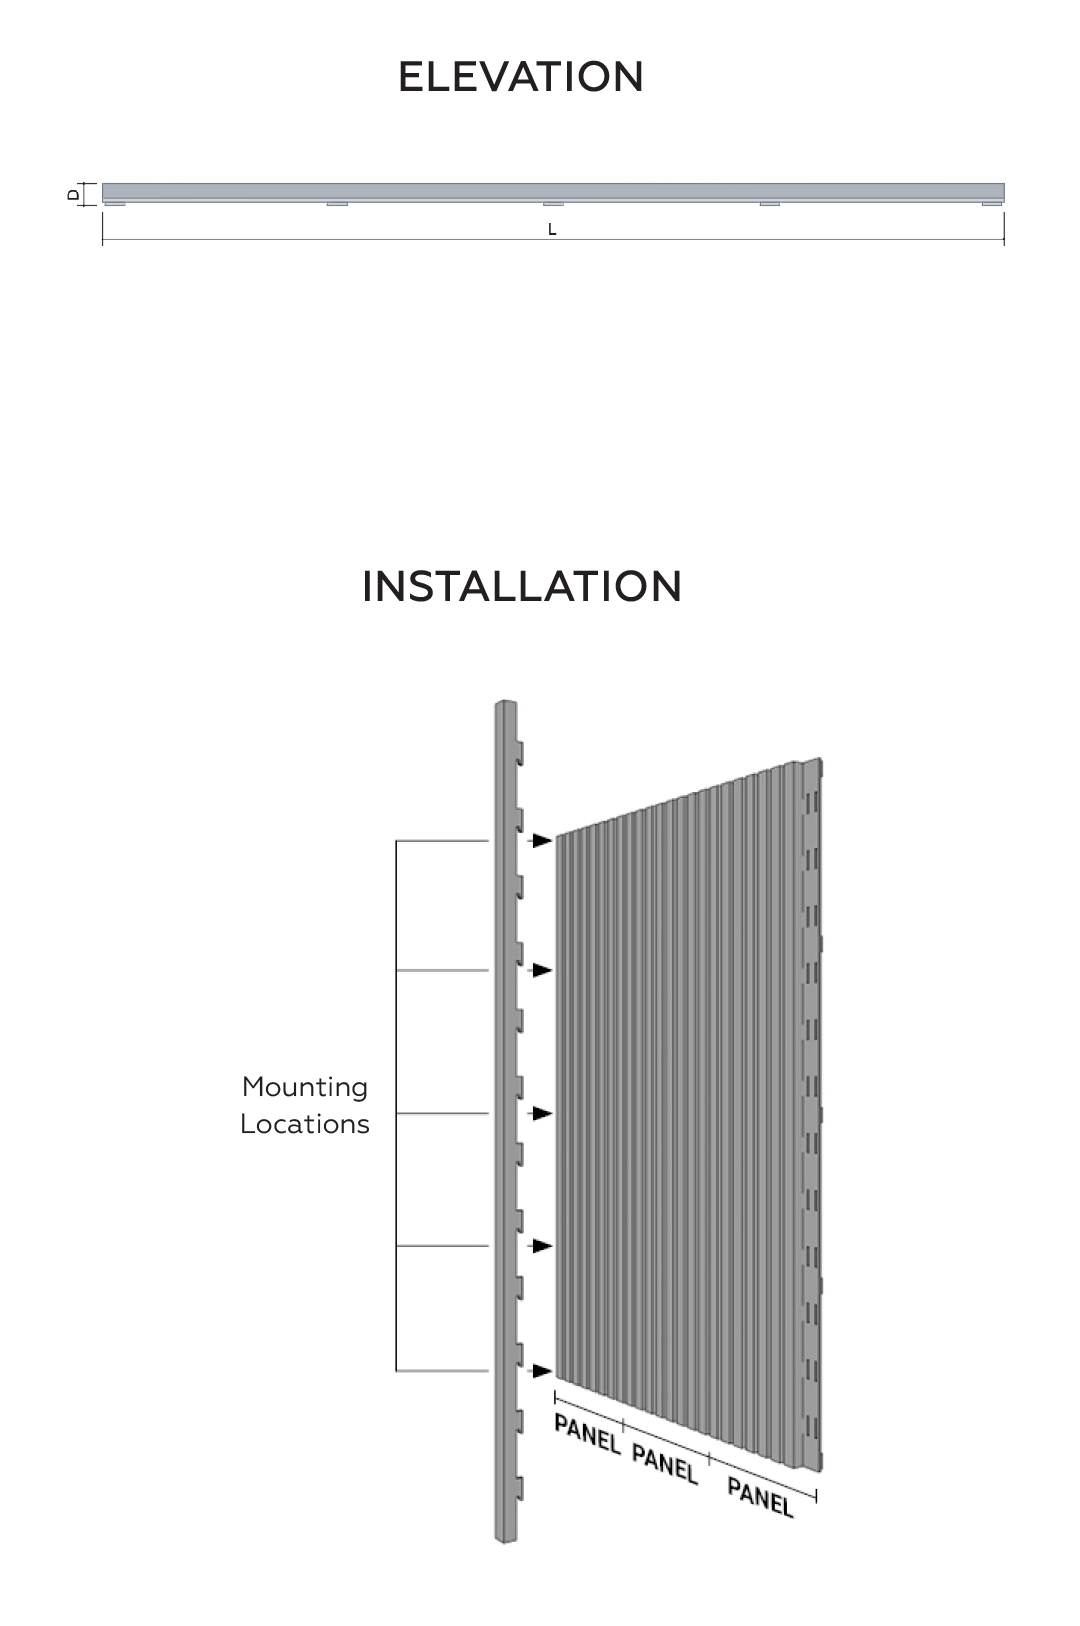 Arete Acoustic Wall Panel Elevation and Installation Diagram